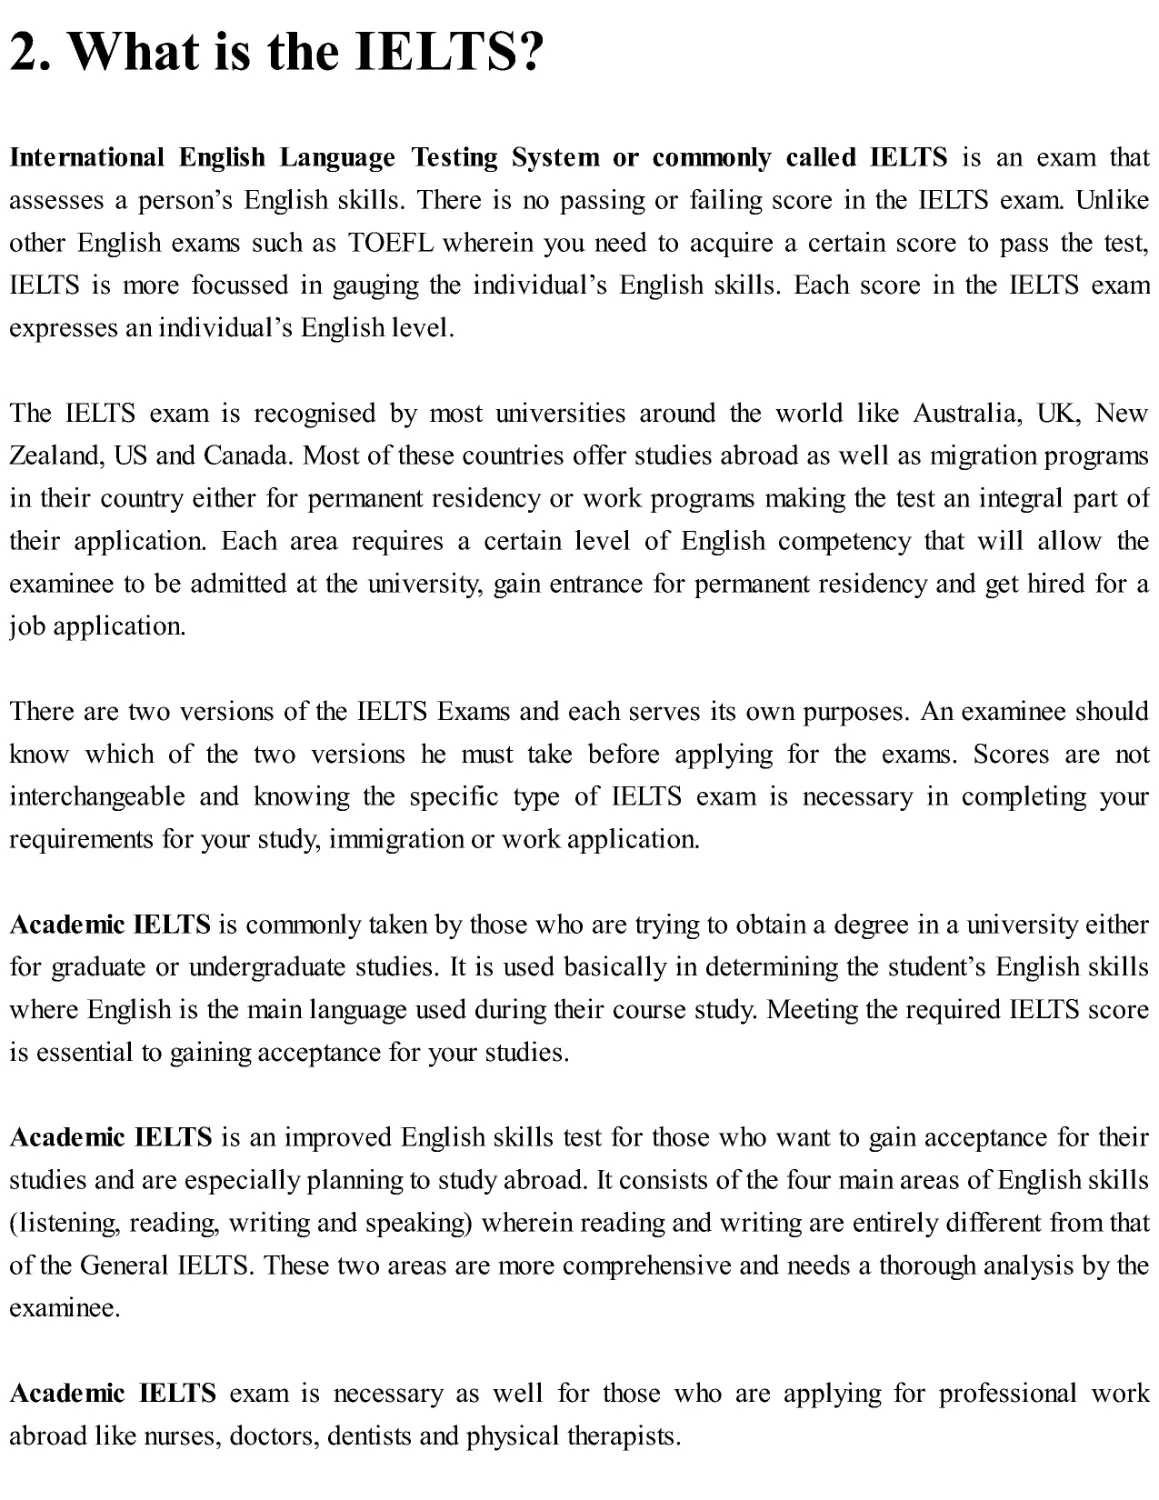 2. What is the IELTS?